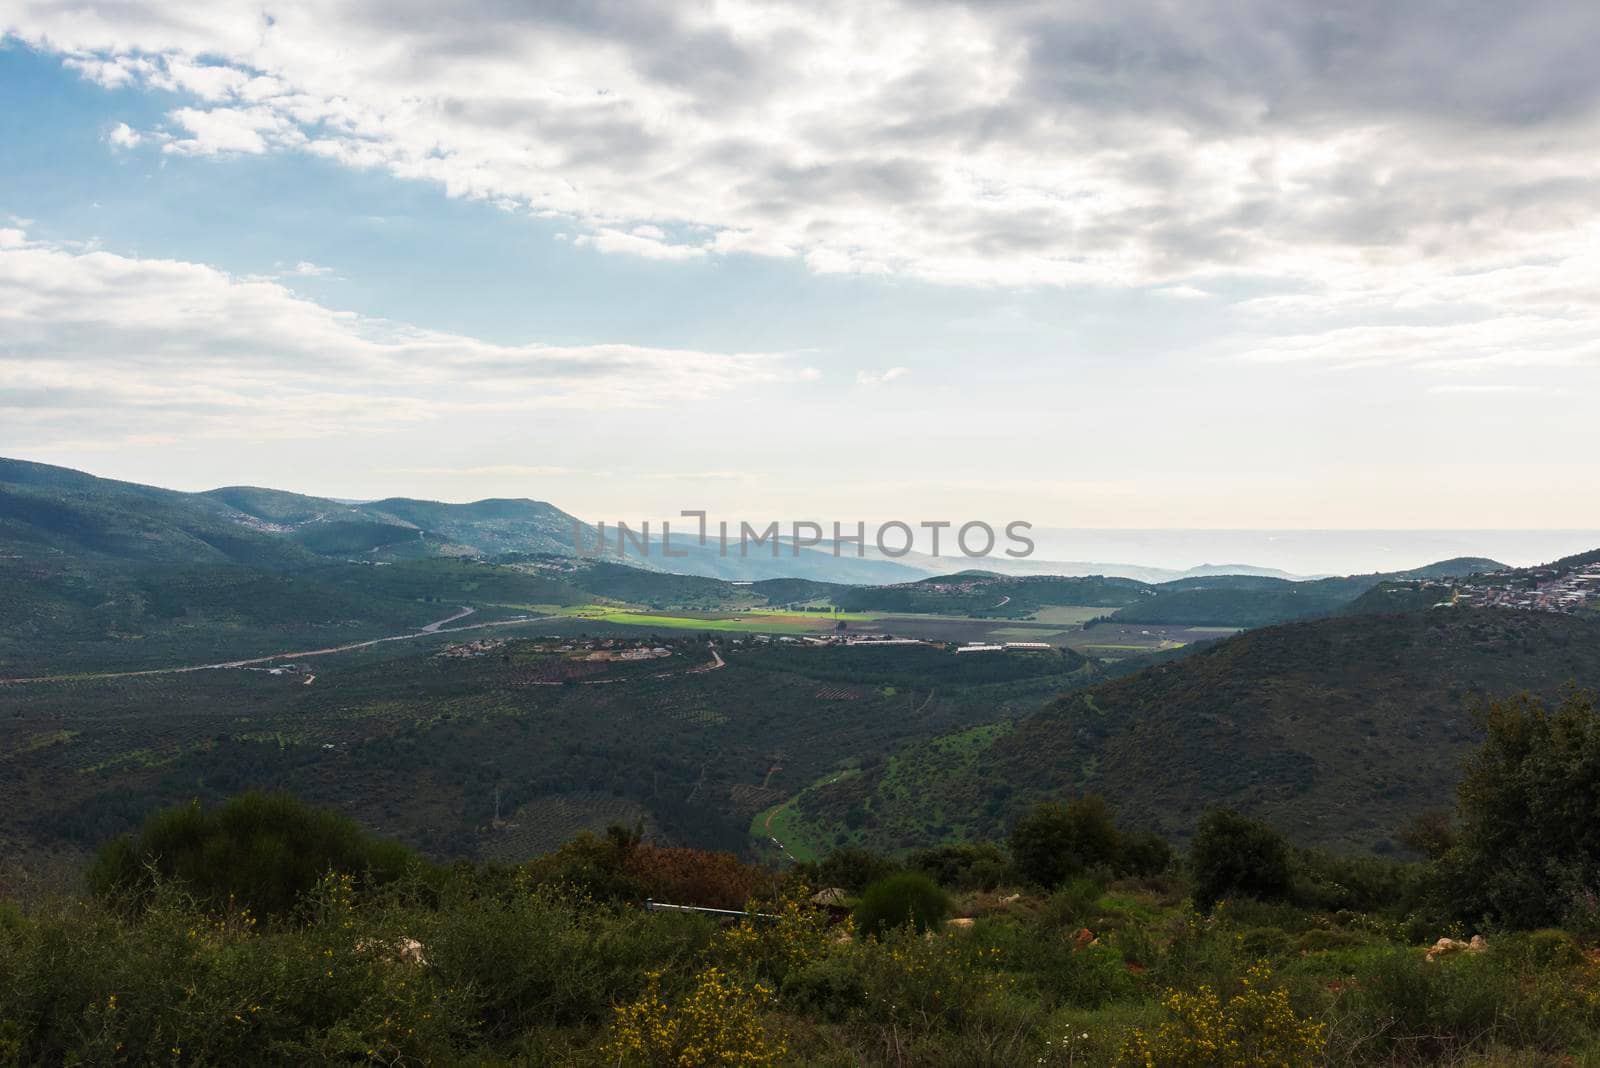 A view of a mountain range and a green valley in the morning at sunrise, against a dramatic backdrop of blue skies and clouds. North District Israel. High quality photo. Travel concept hiking